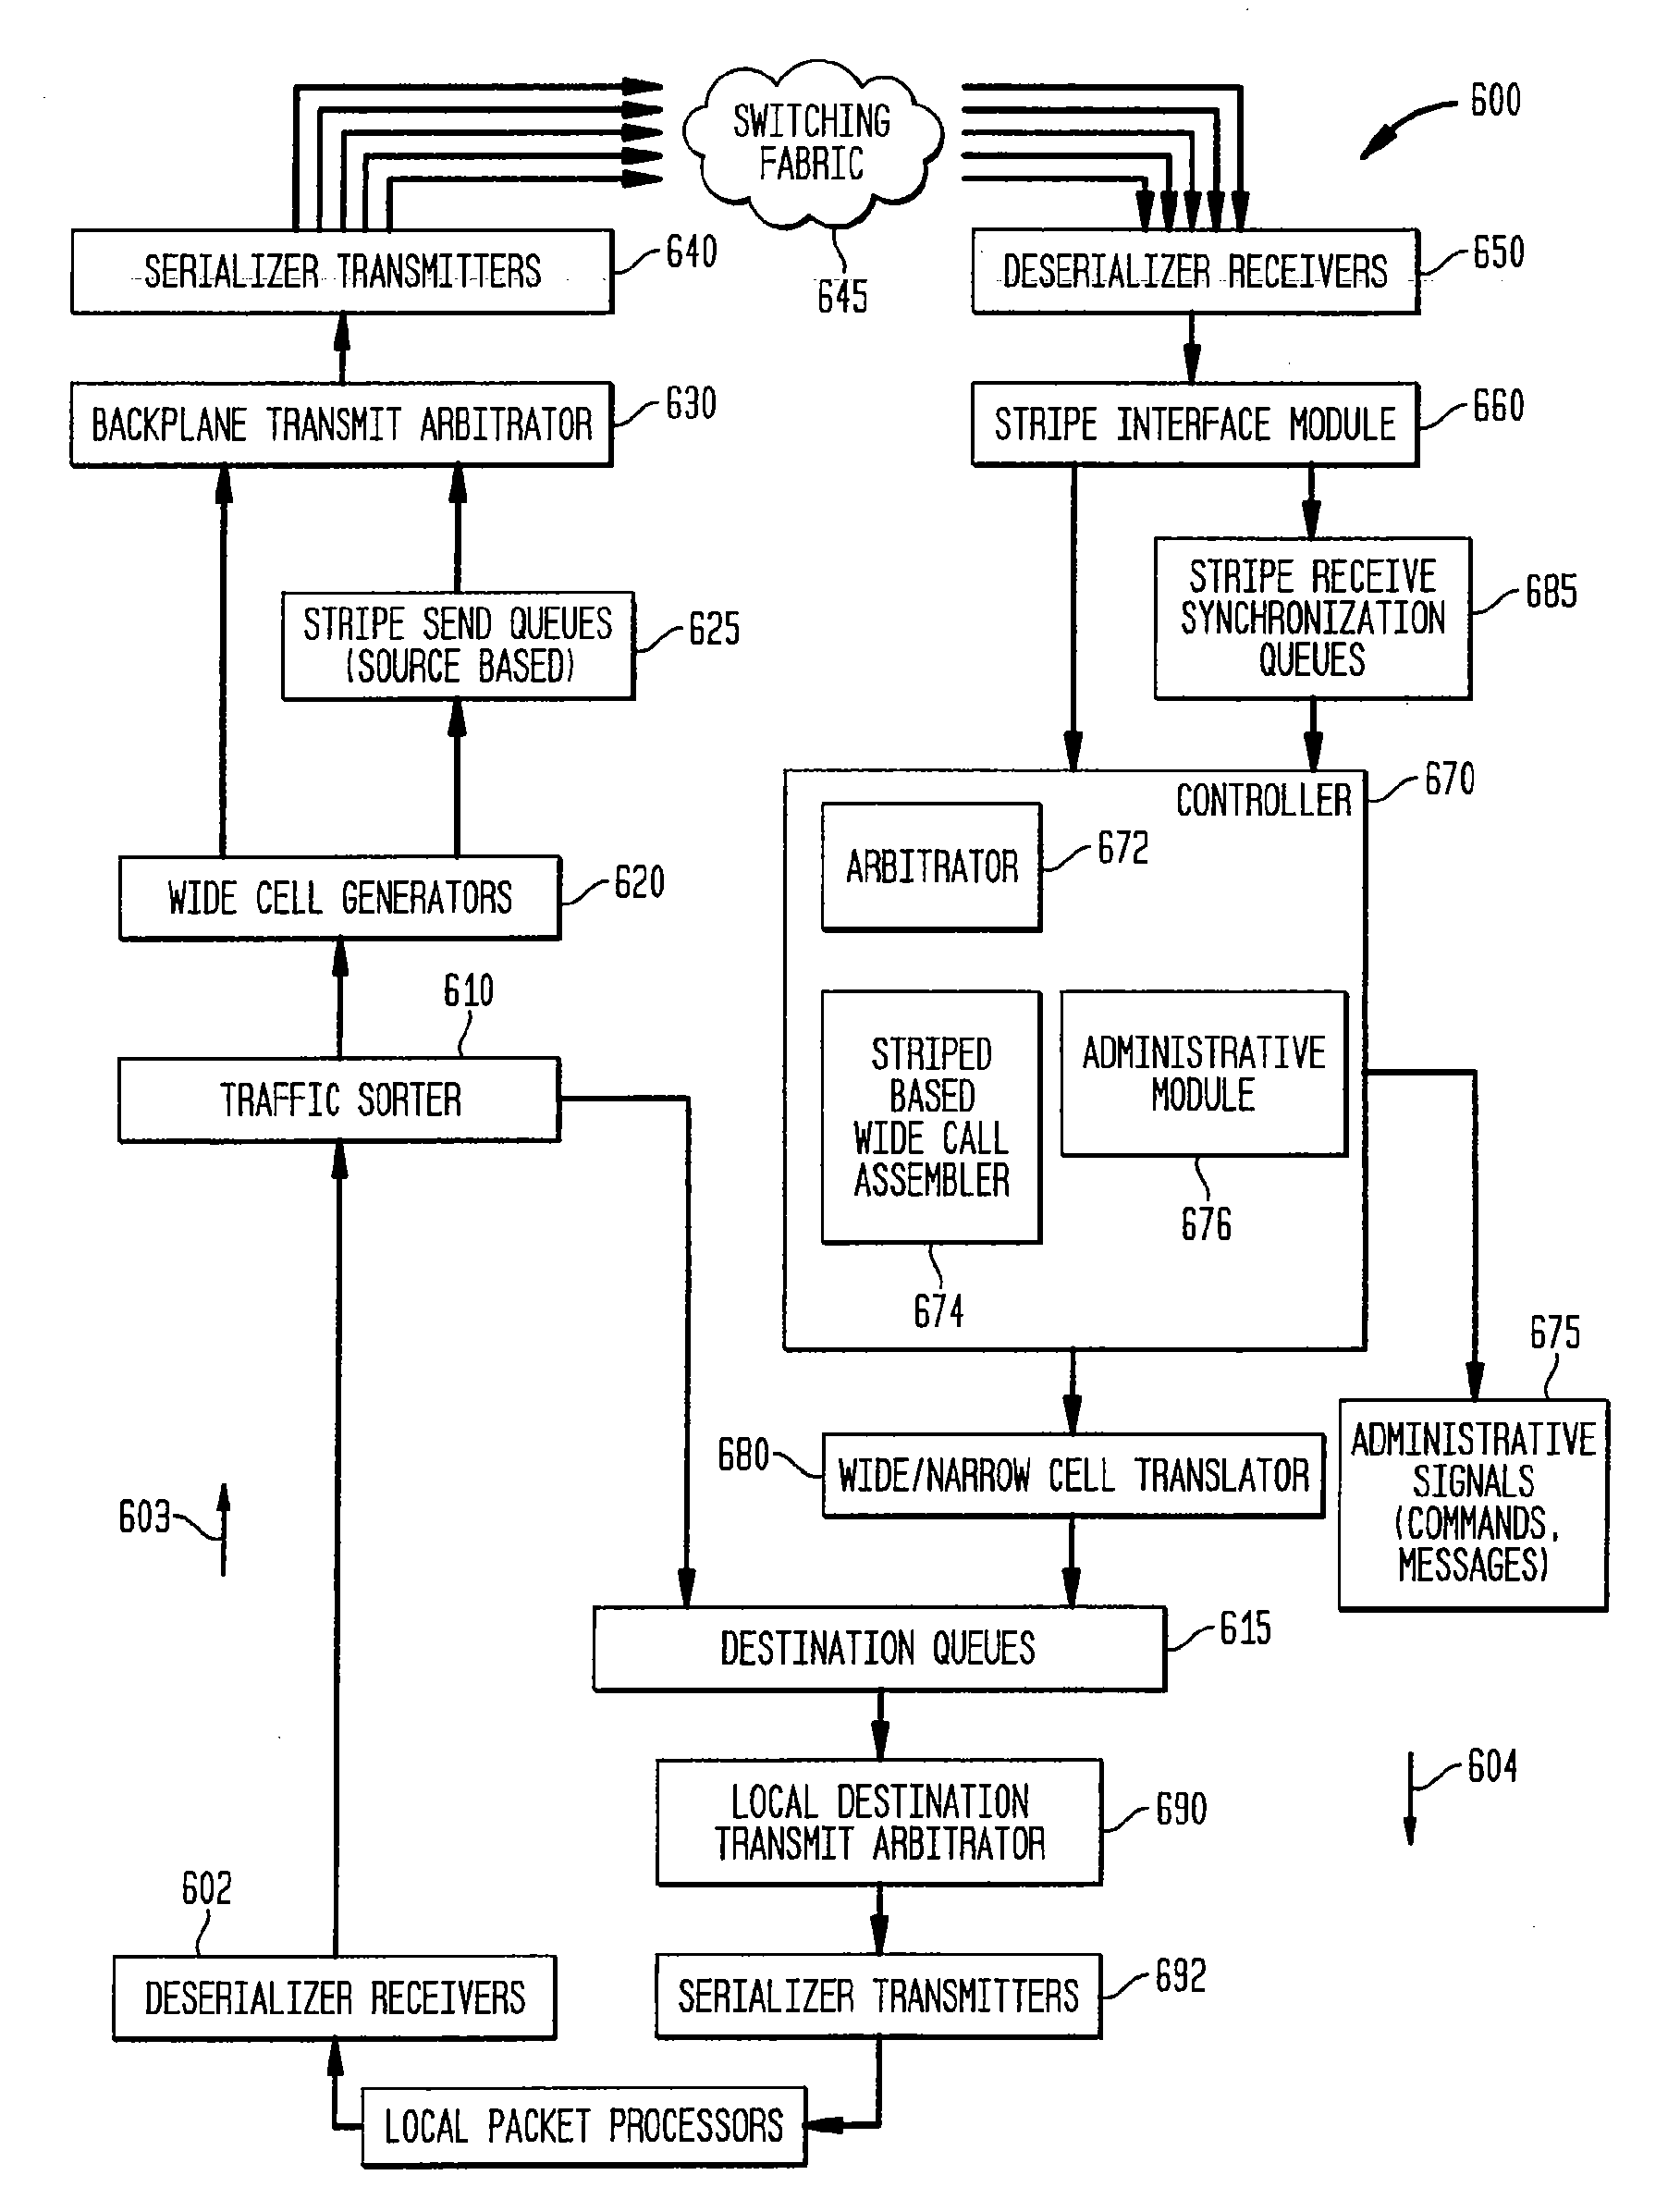 Backplane Interface Adapter with Error Control and Redundant Fabric